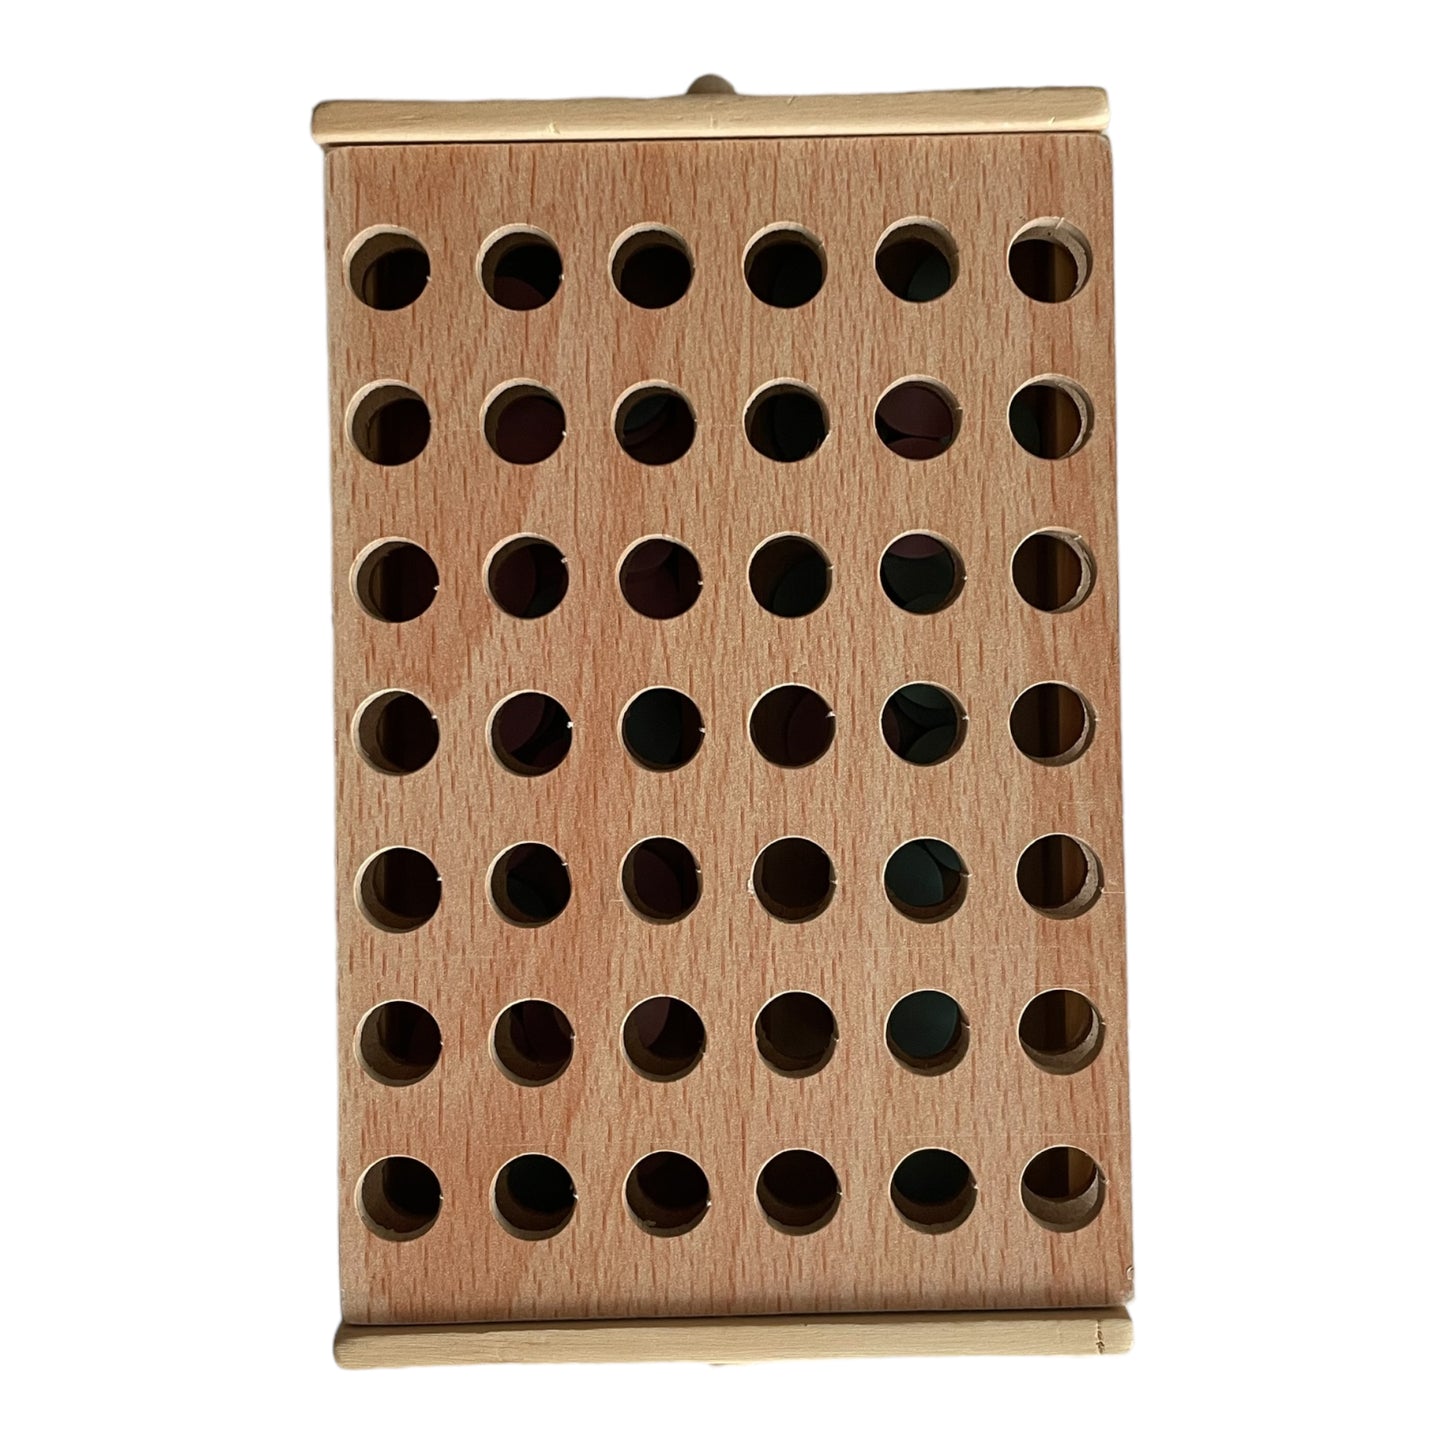 Connect 4, Wood board game